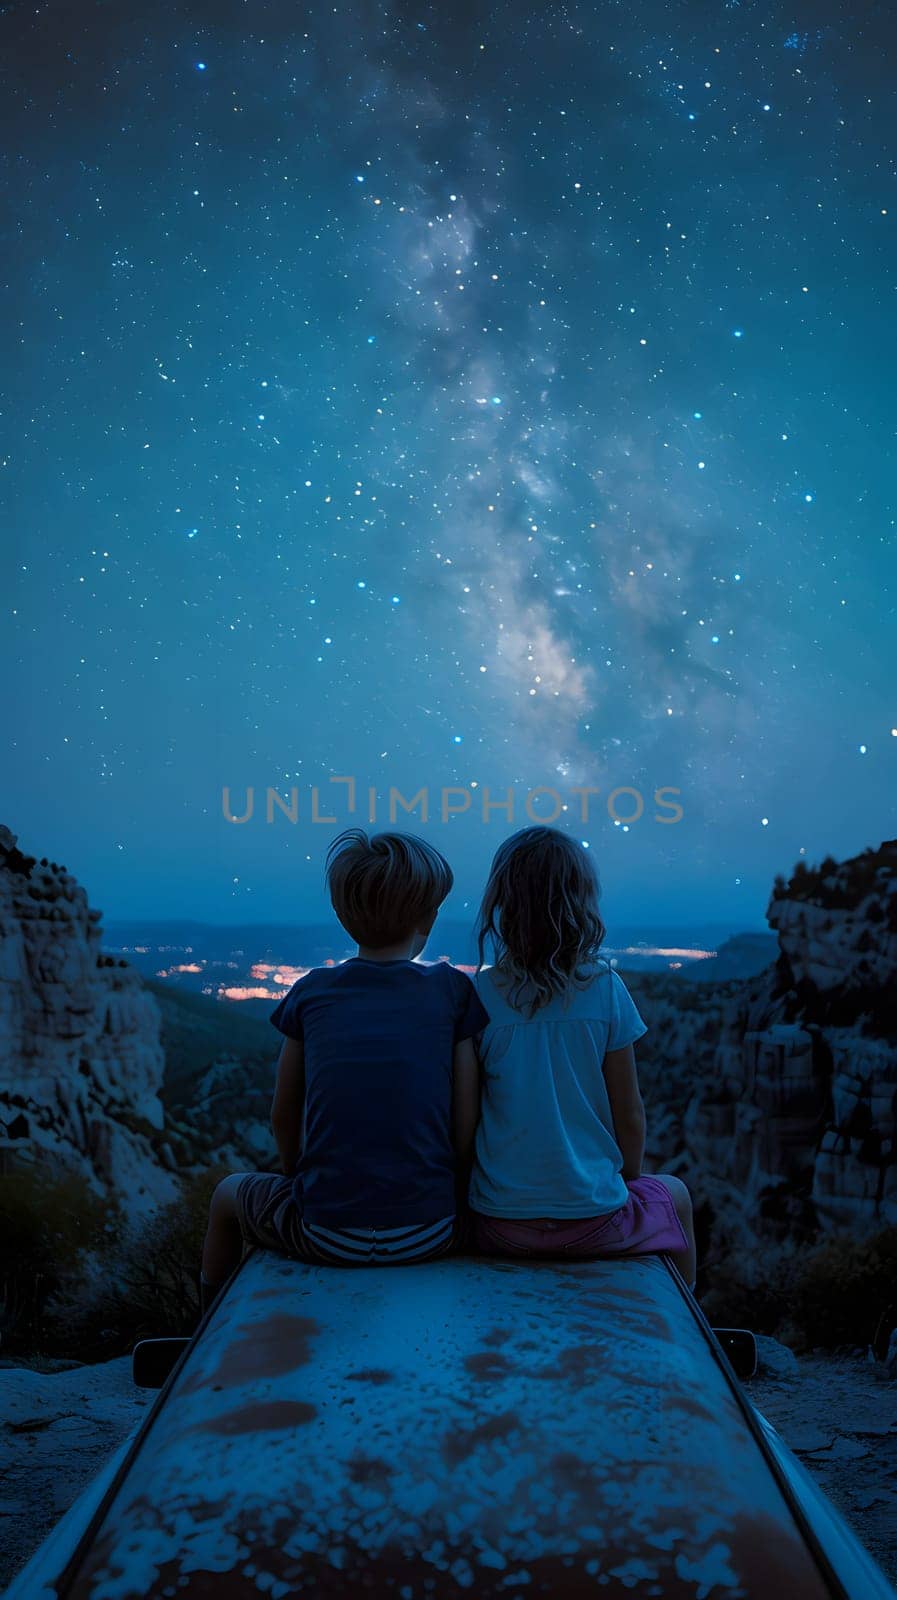 A boy and a girl sit on a bench by the water, gazing at the electric blue stars in the sky. The world feels alive with possibilities as they enjoy the fun art of stargazing together